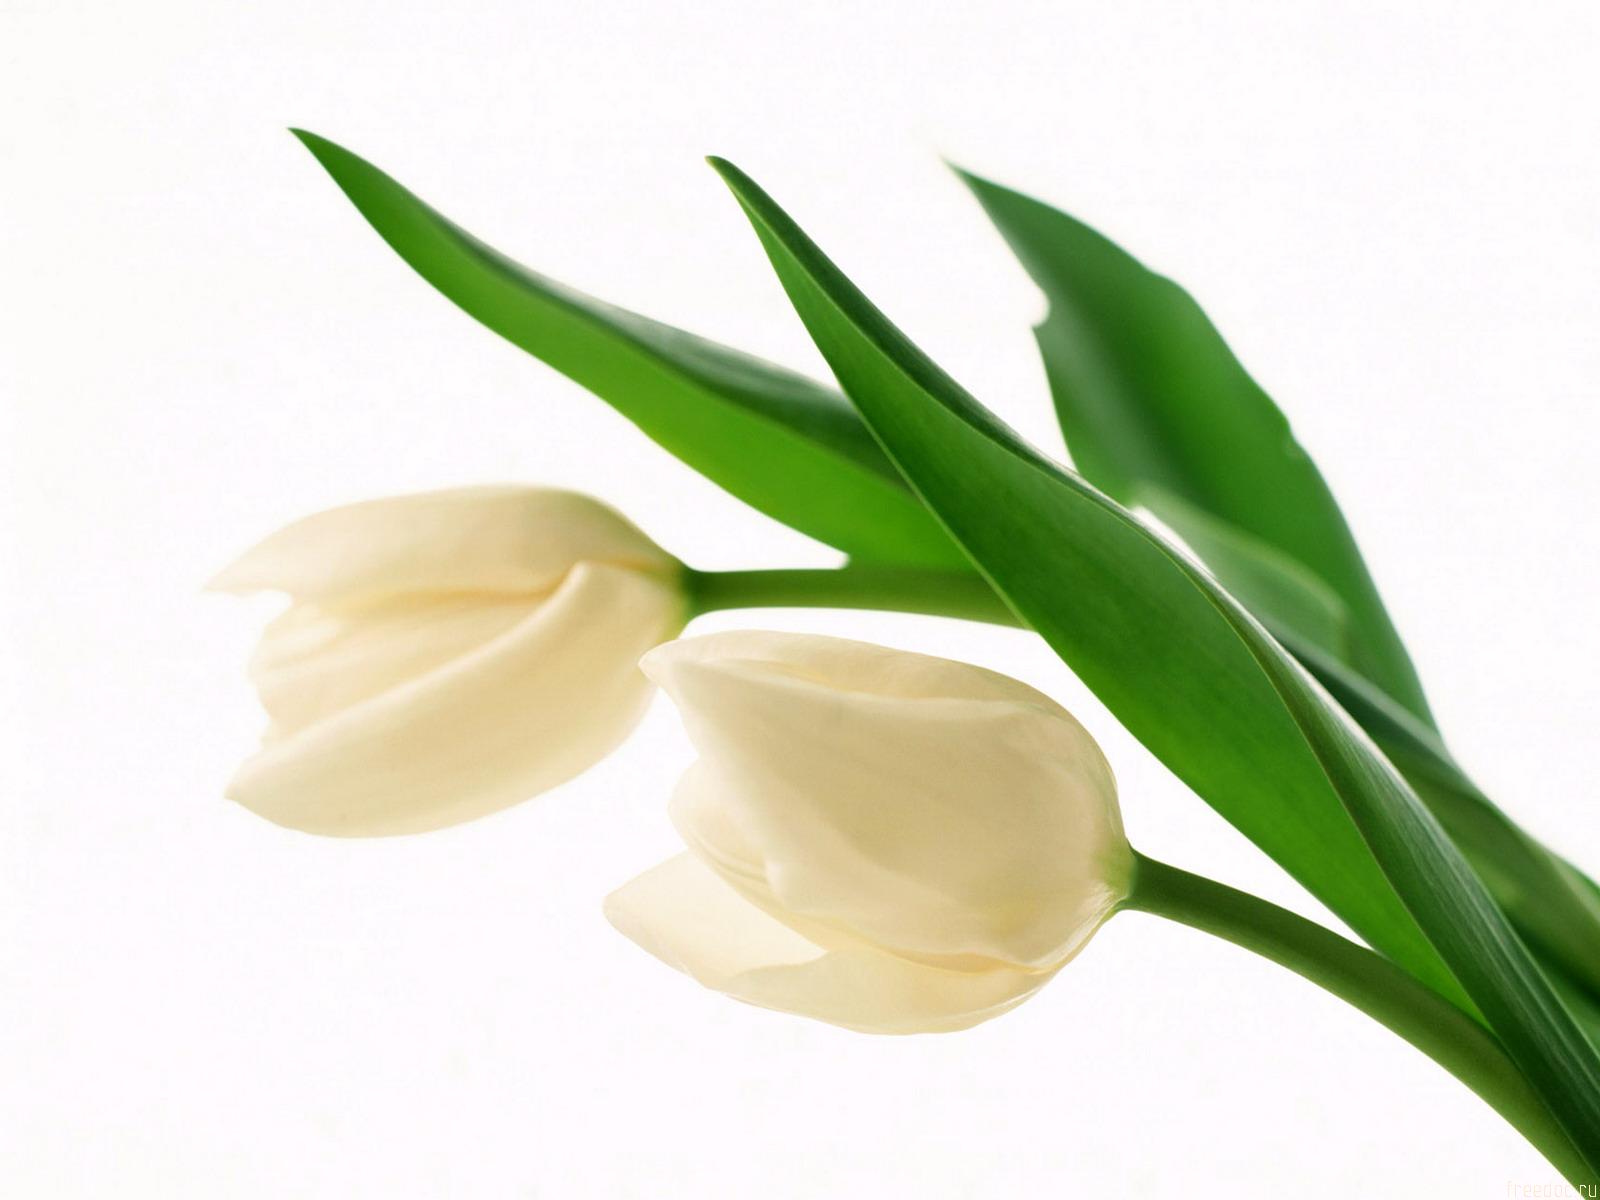 Download wallpaper 950x1534 white tulips portrait iphone 950x1534 hd  background 19468